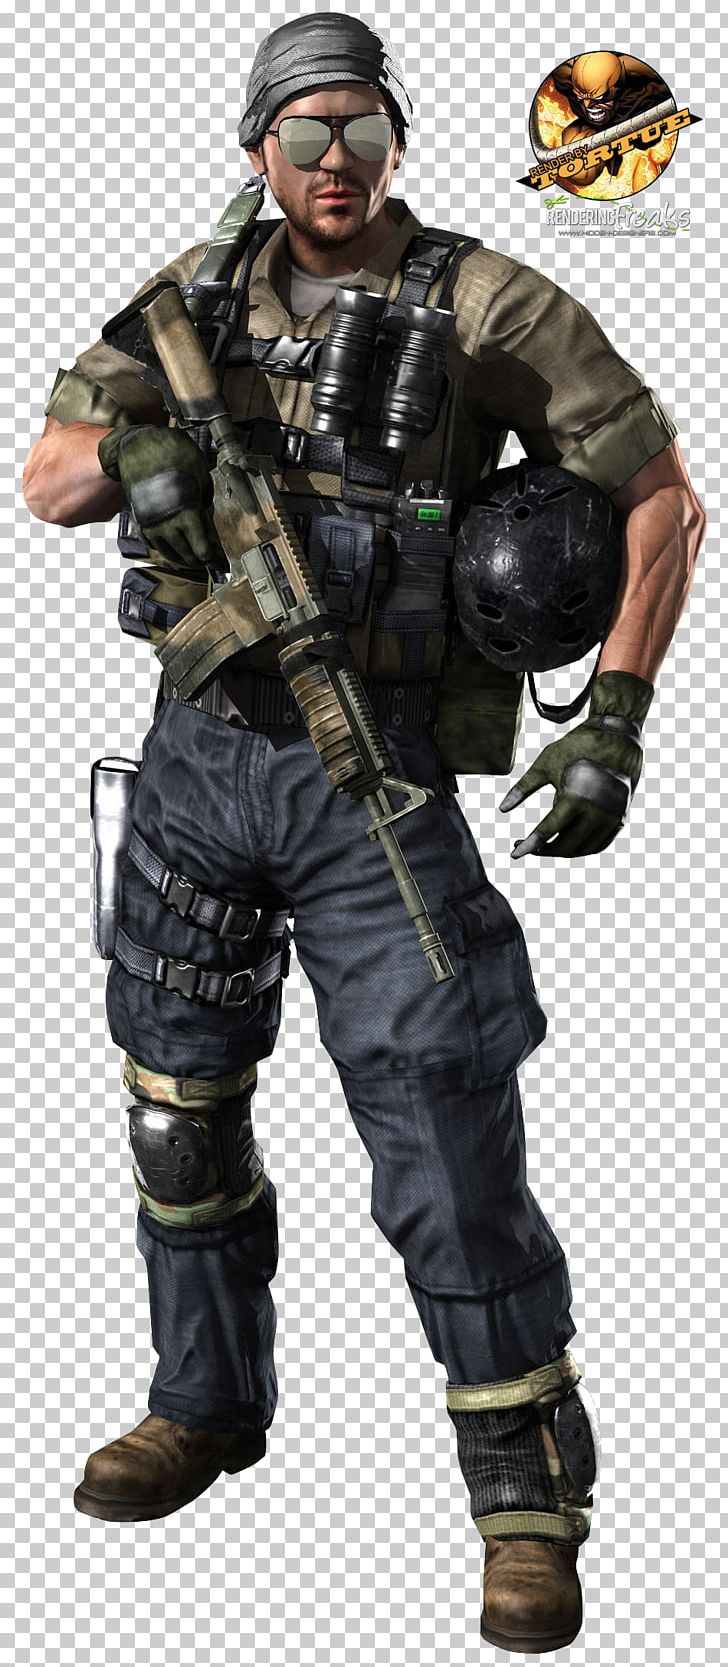 MAG PlayStation 3 Video Game SOCOM 4 U.S. Navy SEALs Concept Art PNG, Clipart, Action Figure, Army, Art, Computer, Game Free PNG Download